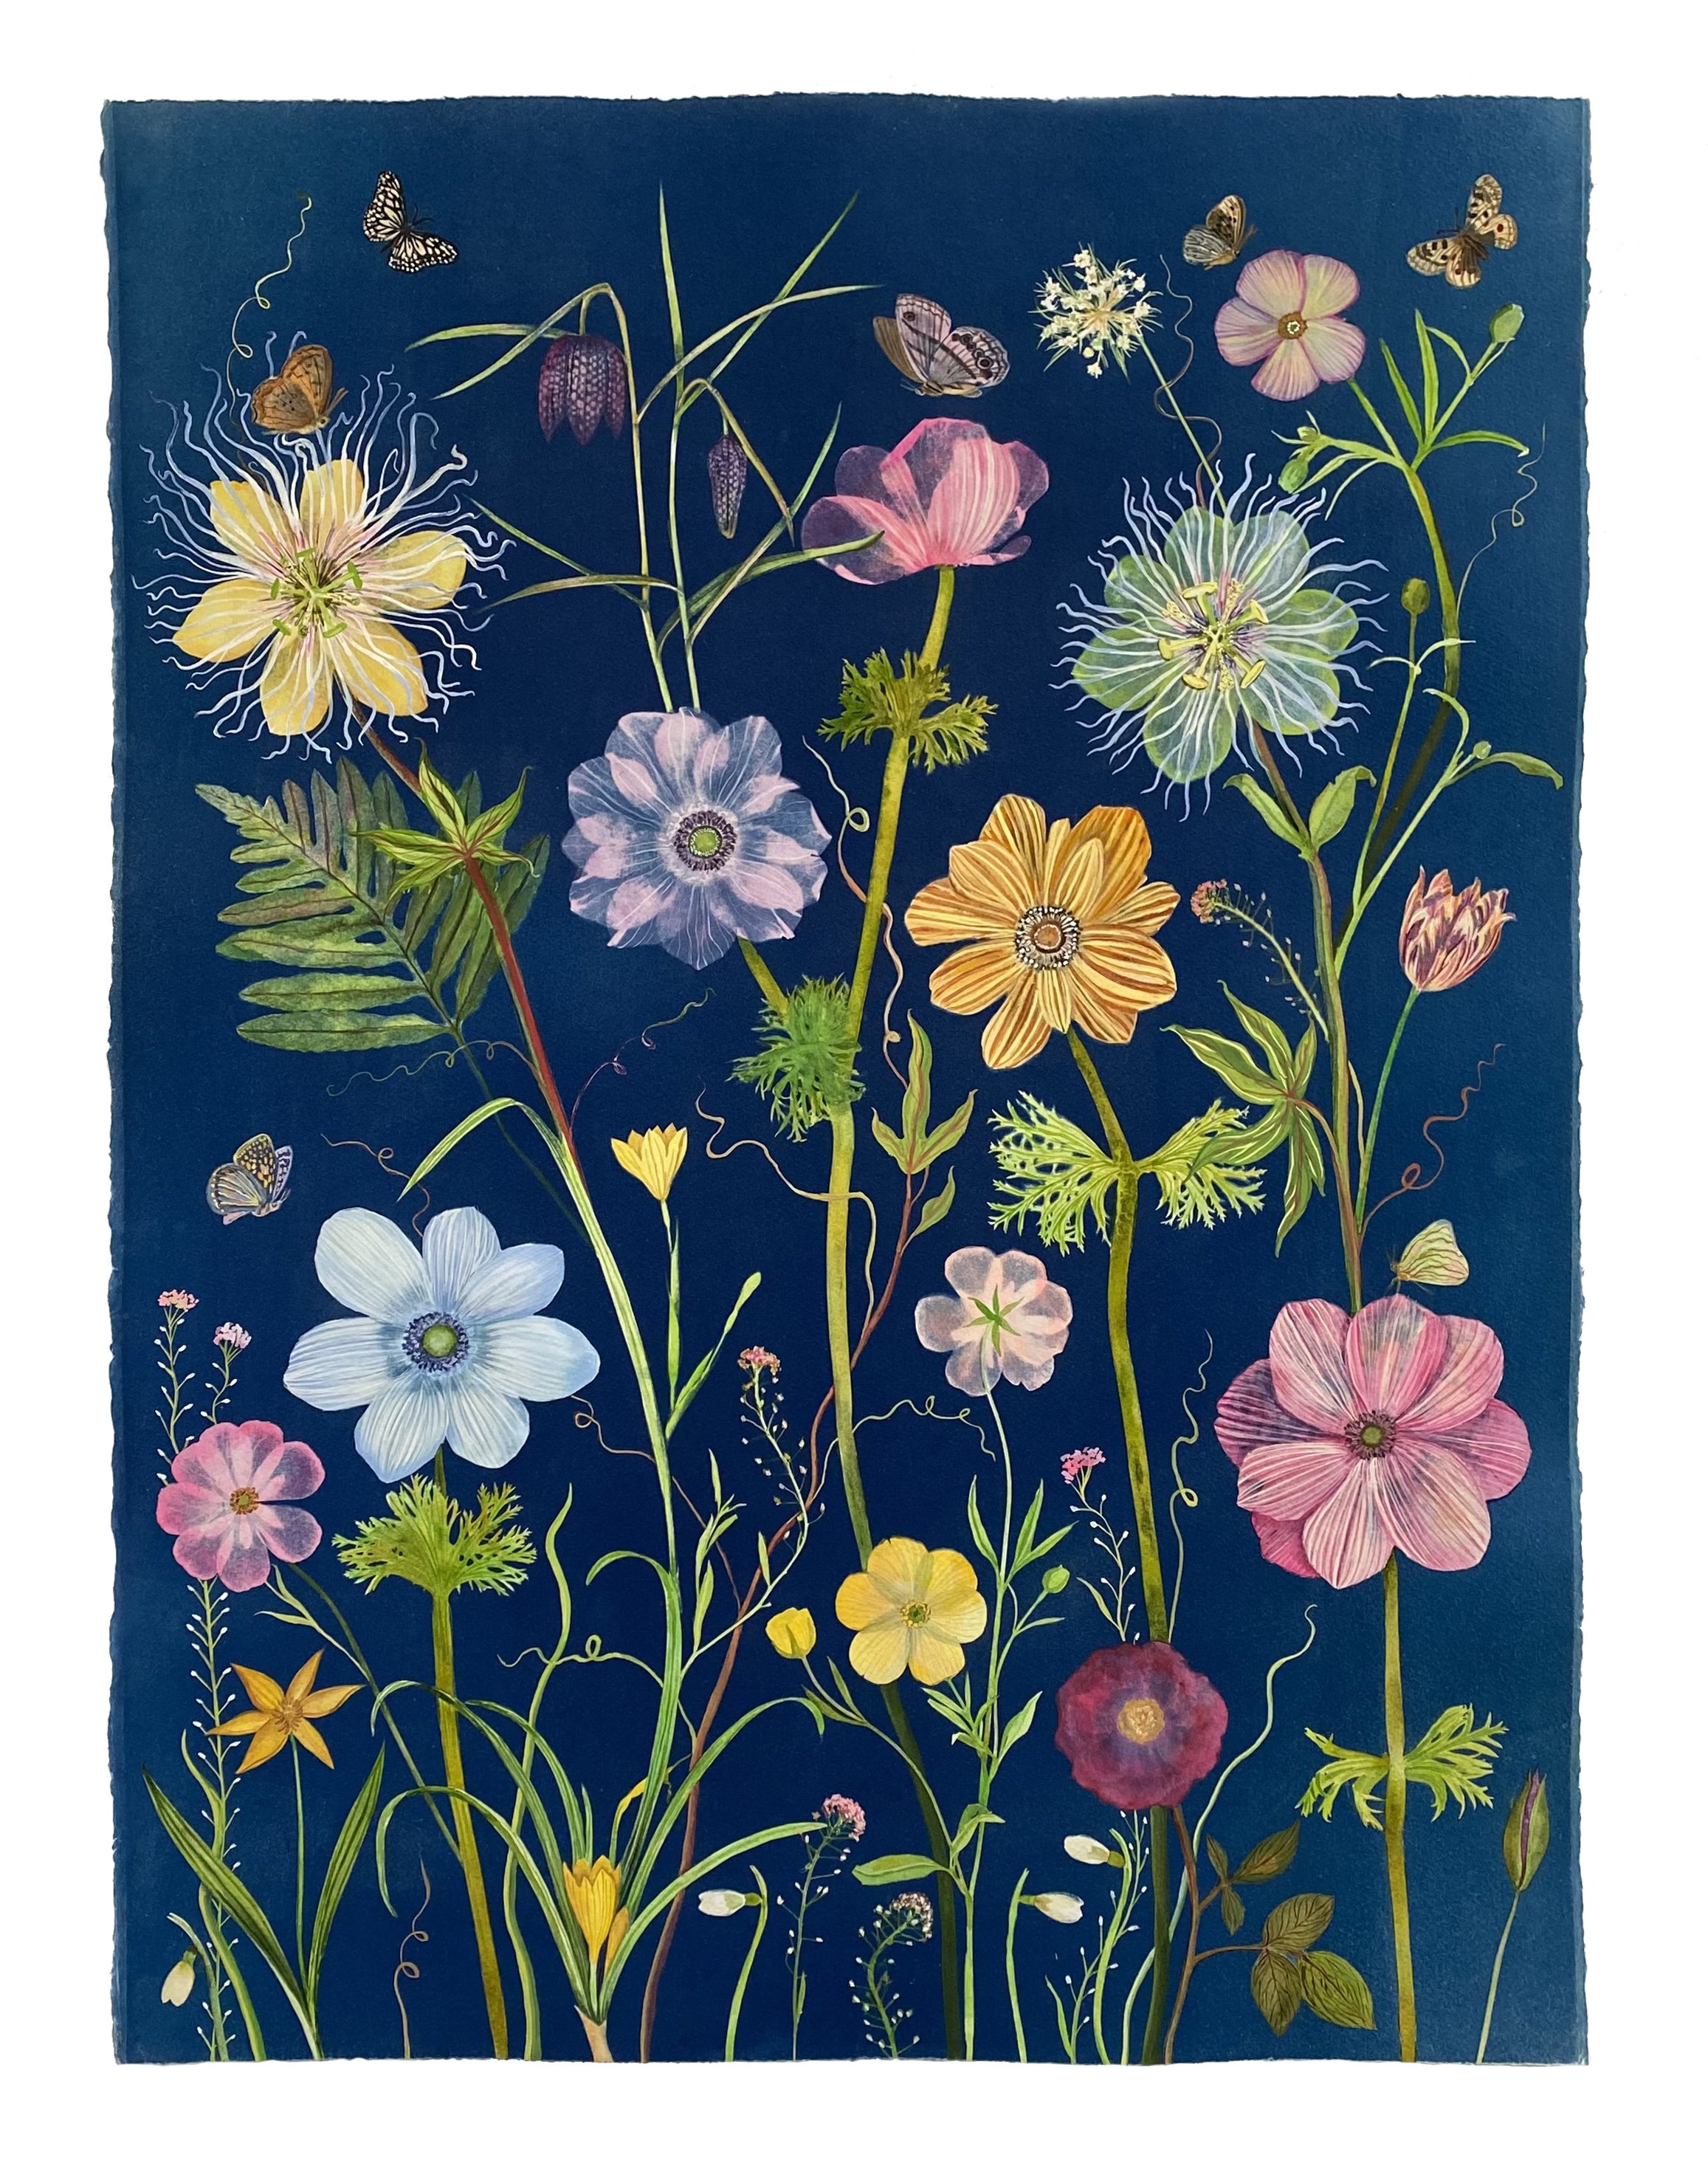 Nocturnal Nature (Anemone, Passionflower, Buttercup, etc)